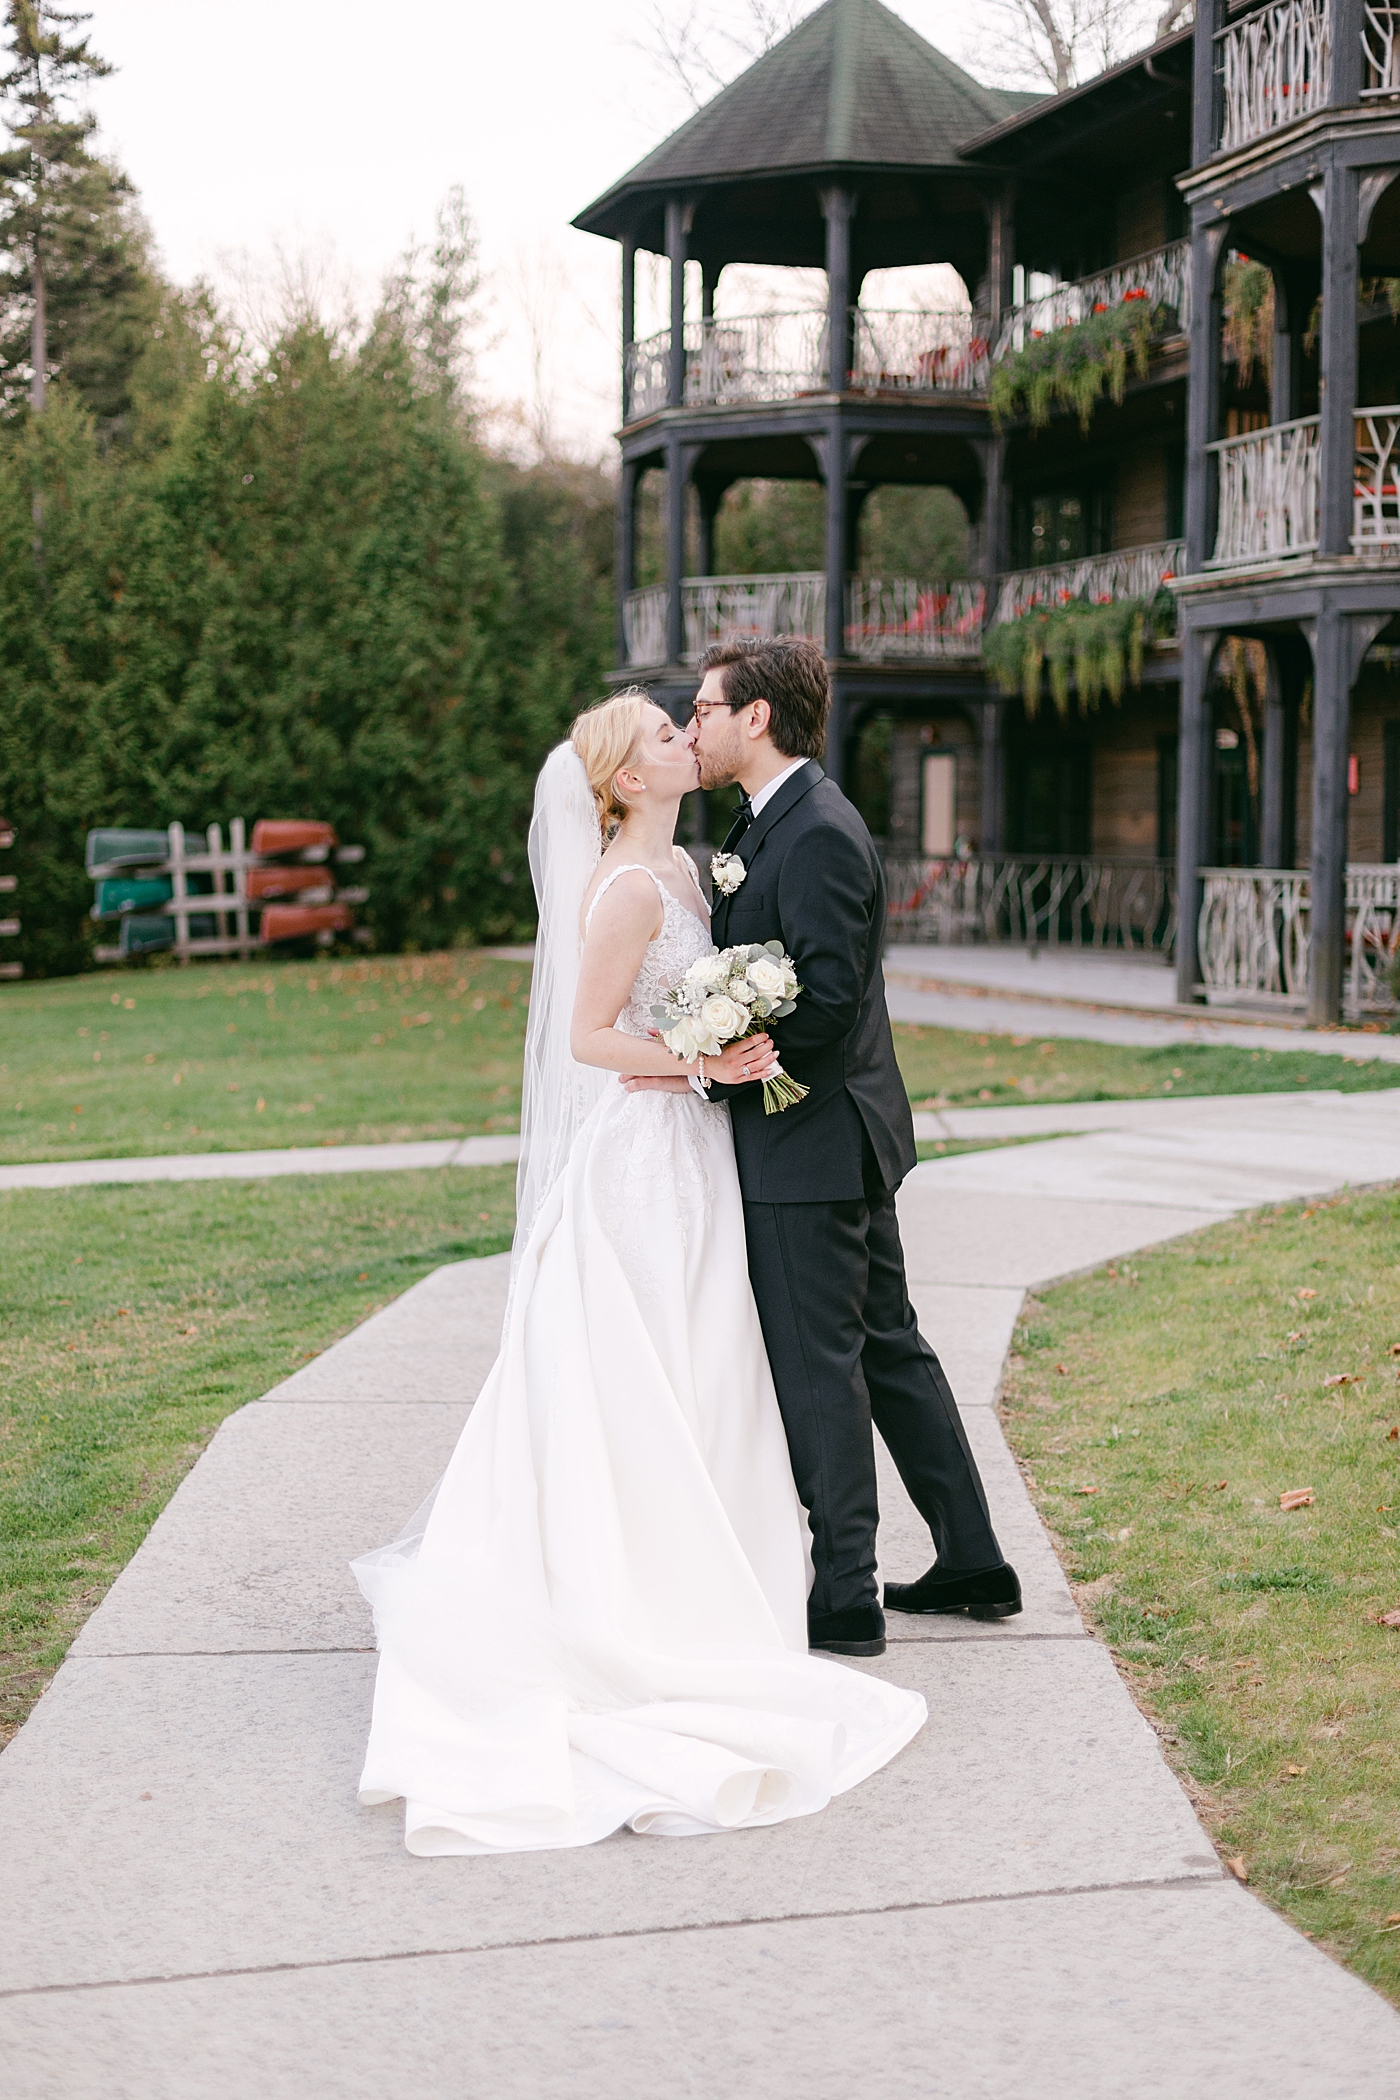 Bride and groom kissing near lodge | Image by Hope Helmuth Photography